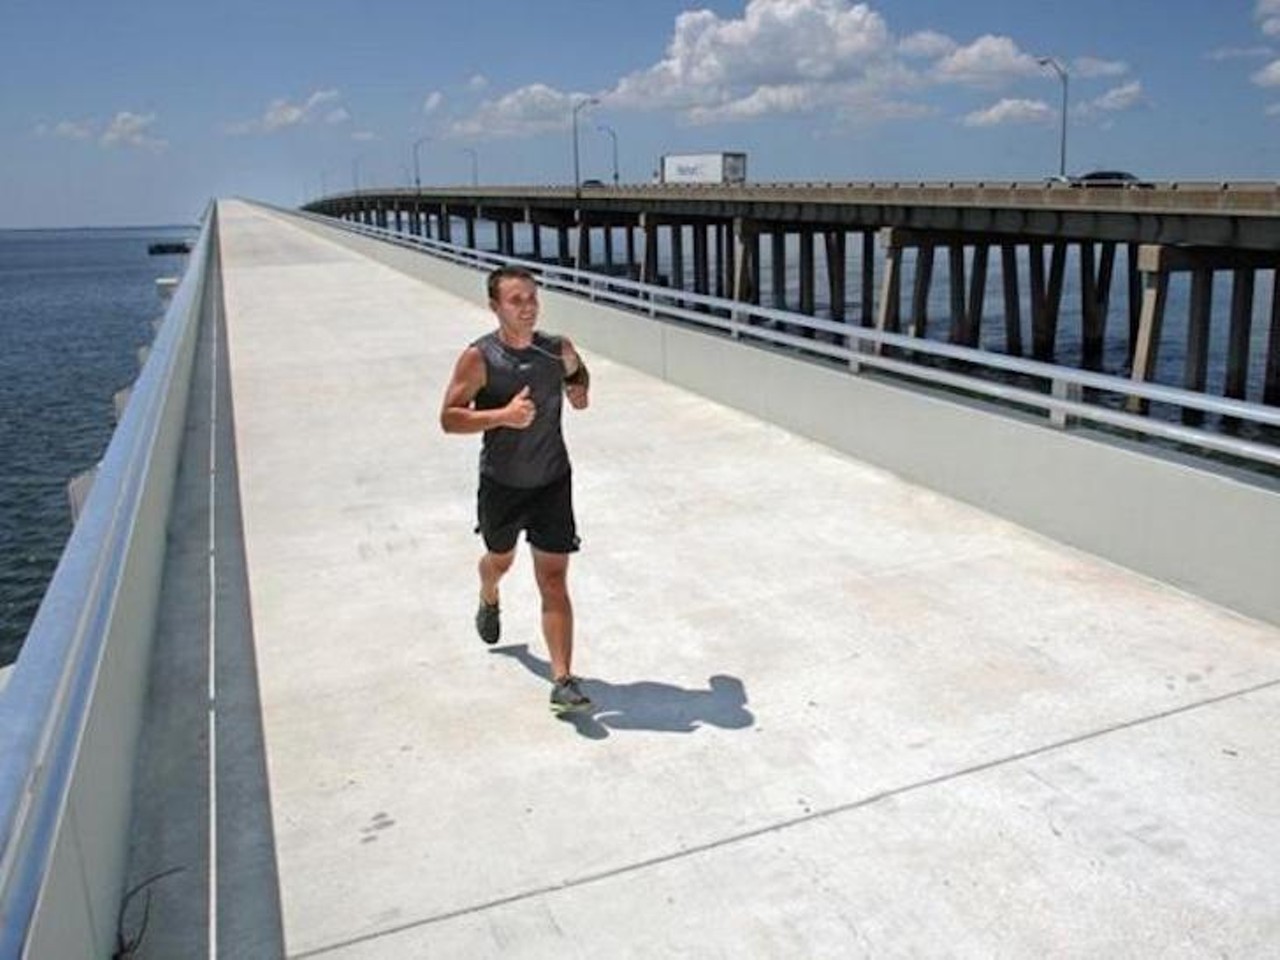 Courtney Campbell Causeway 
Courtney Campbell Causeway, Clearwater
The Courtney Campbell Causeway is a more than 10-mile paved path for joggers, cyclists and skaters seeking views of Tampa Bay. The path runs along the entire southern side of the Courtney Campbell Causeway, from the Veterans Expressway in Tampa to Bayshore Boulevard in Clearwater.
Photo via Visit St. Pete/Clearwater/Website